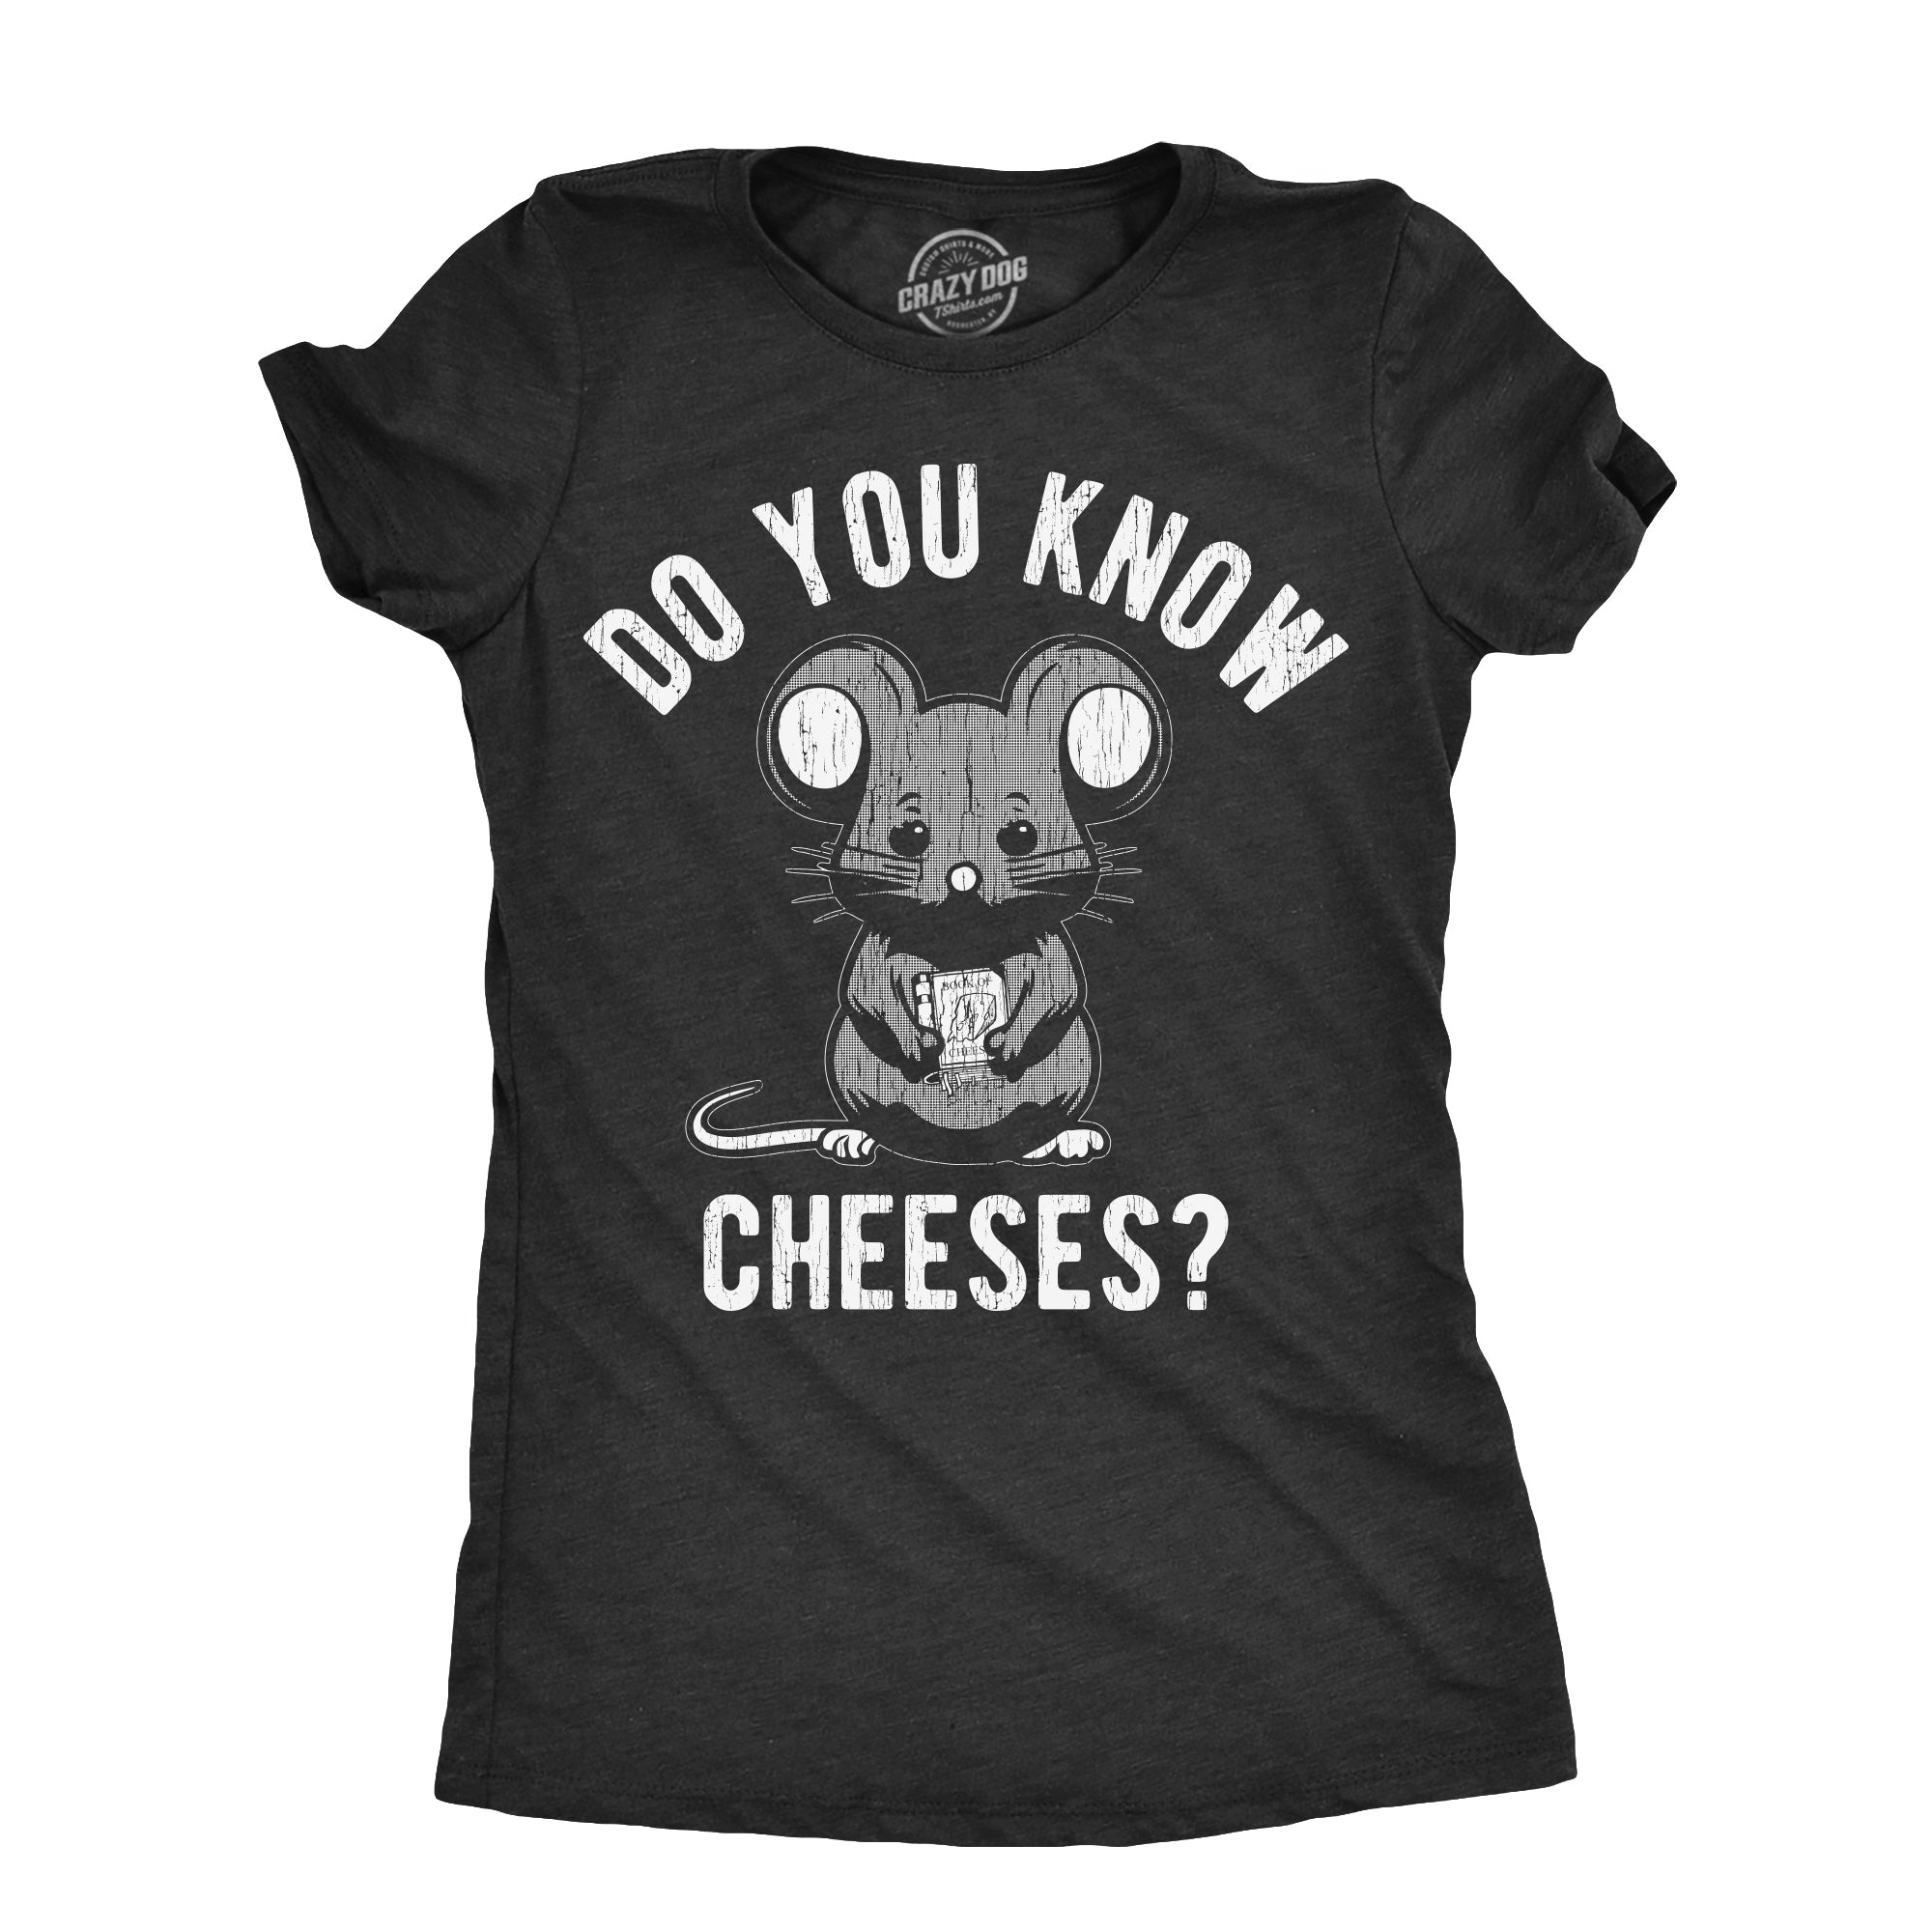 Funny Heather Black - CHEESES Do You Know Cheeses Womens T Shirt Nerdy Food sarcastic Tee